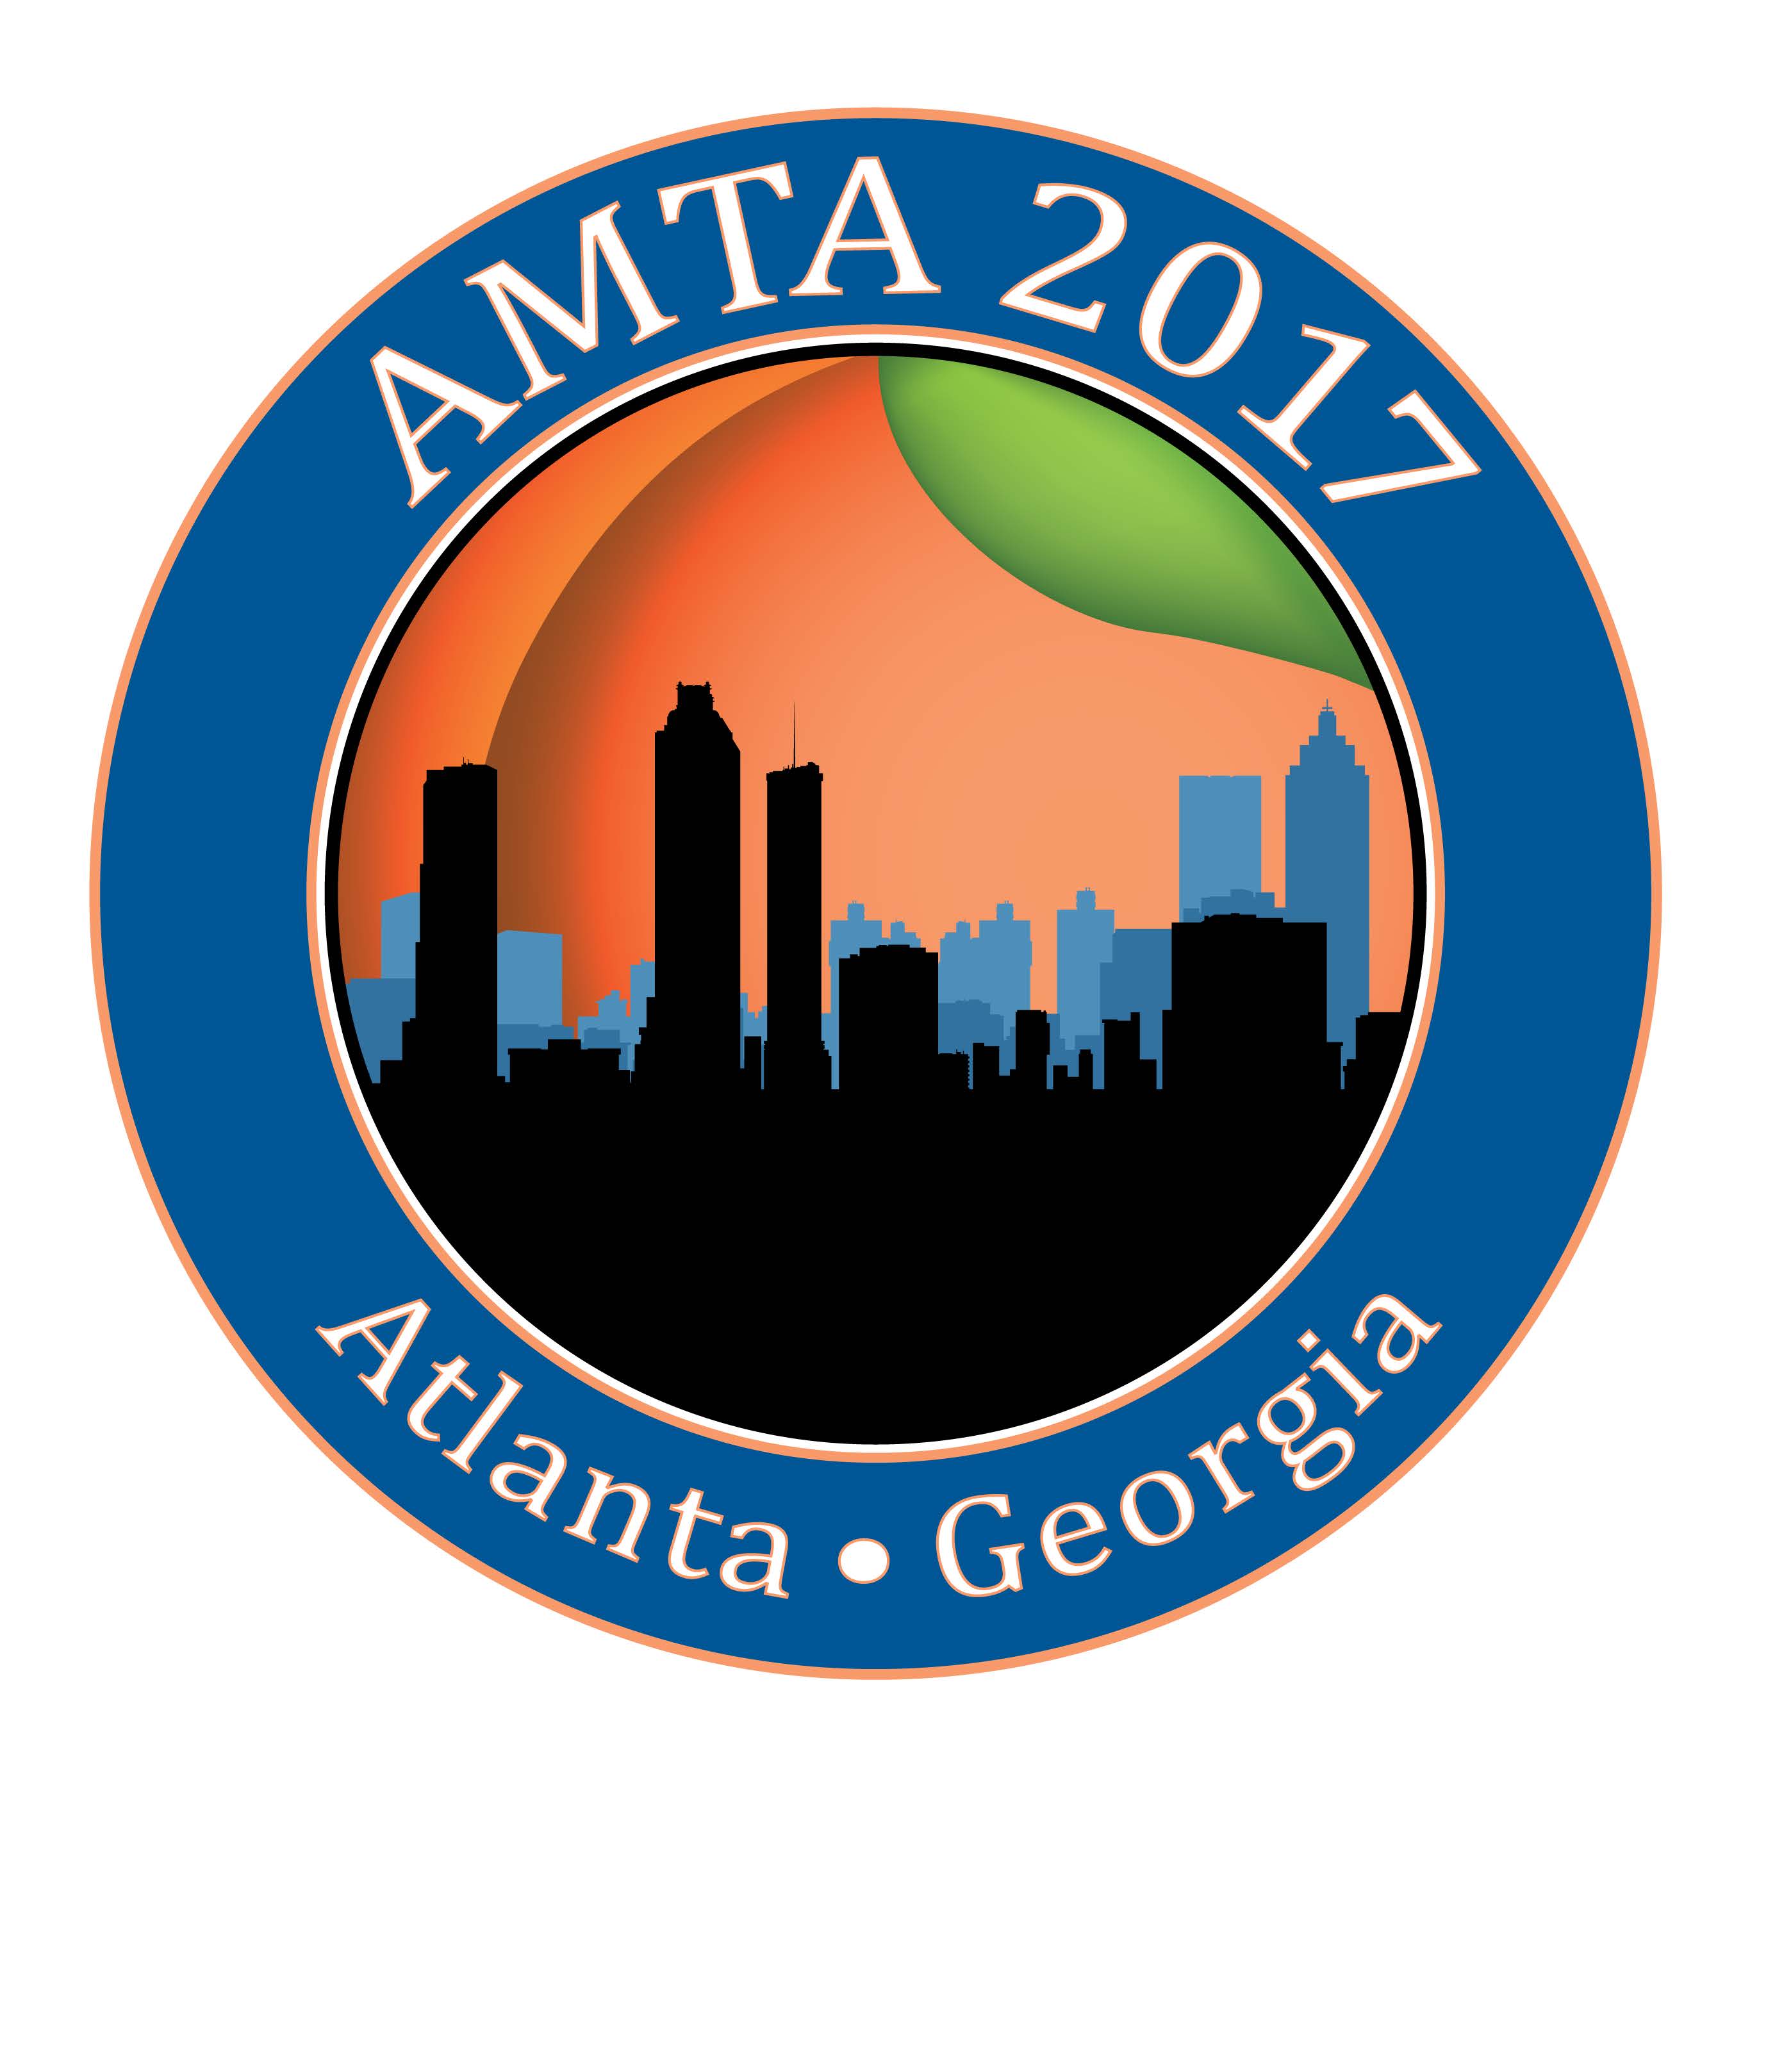 39th Annual Meeting and Symposium of the Antenna Measurement Techniques Association (AMTA)